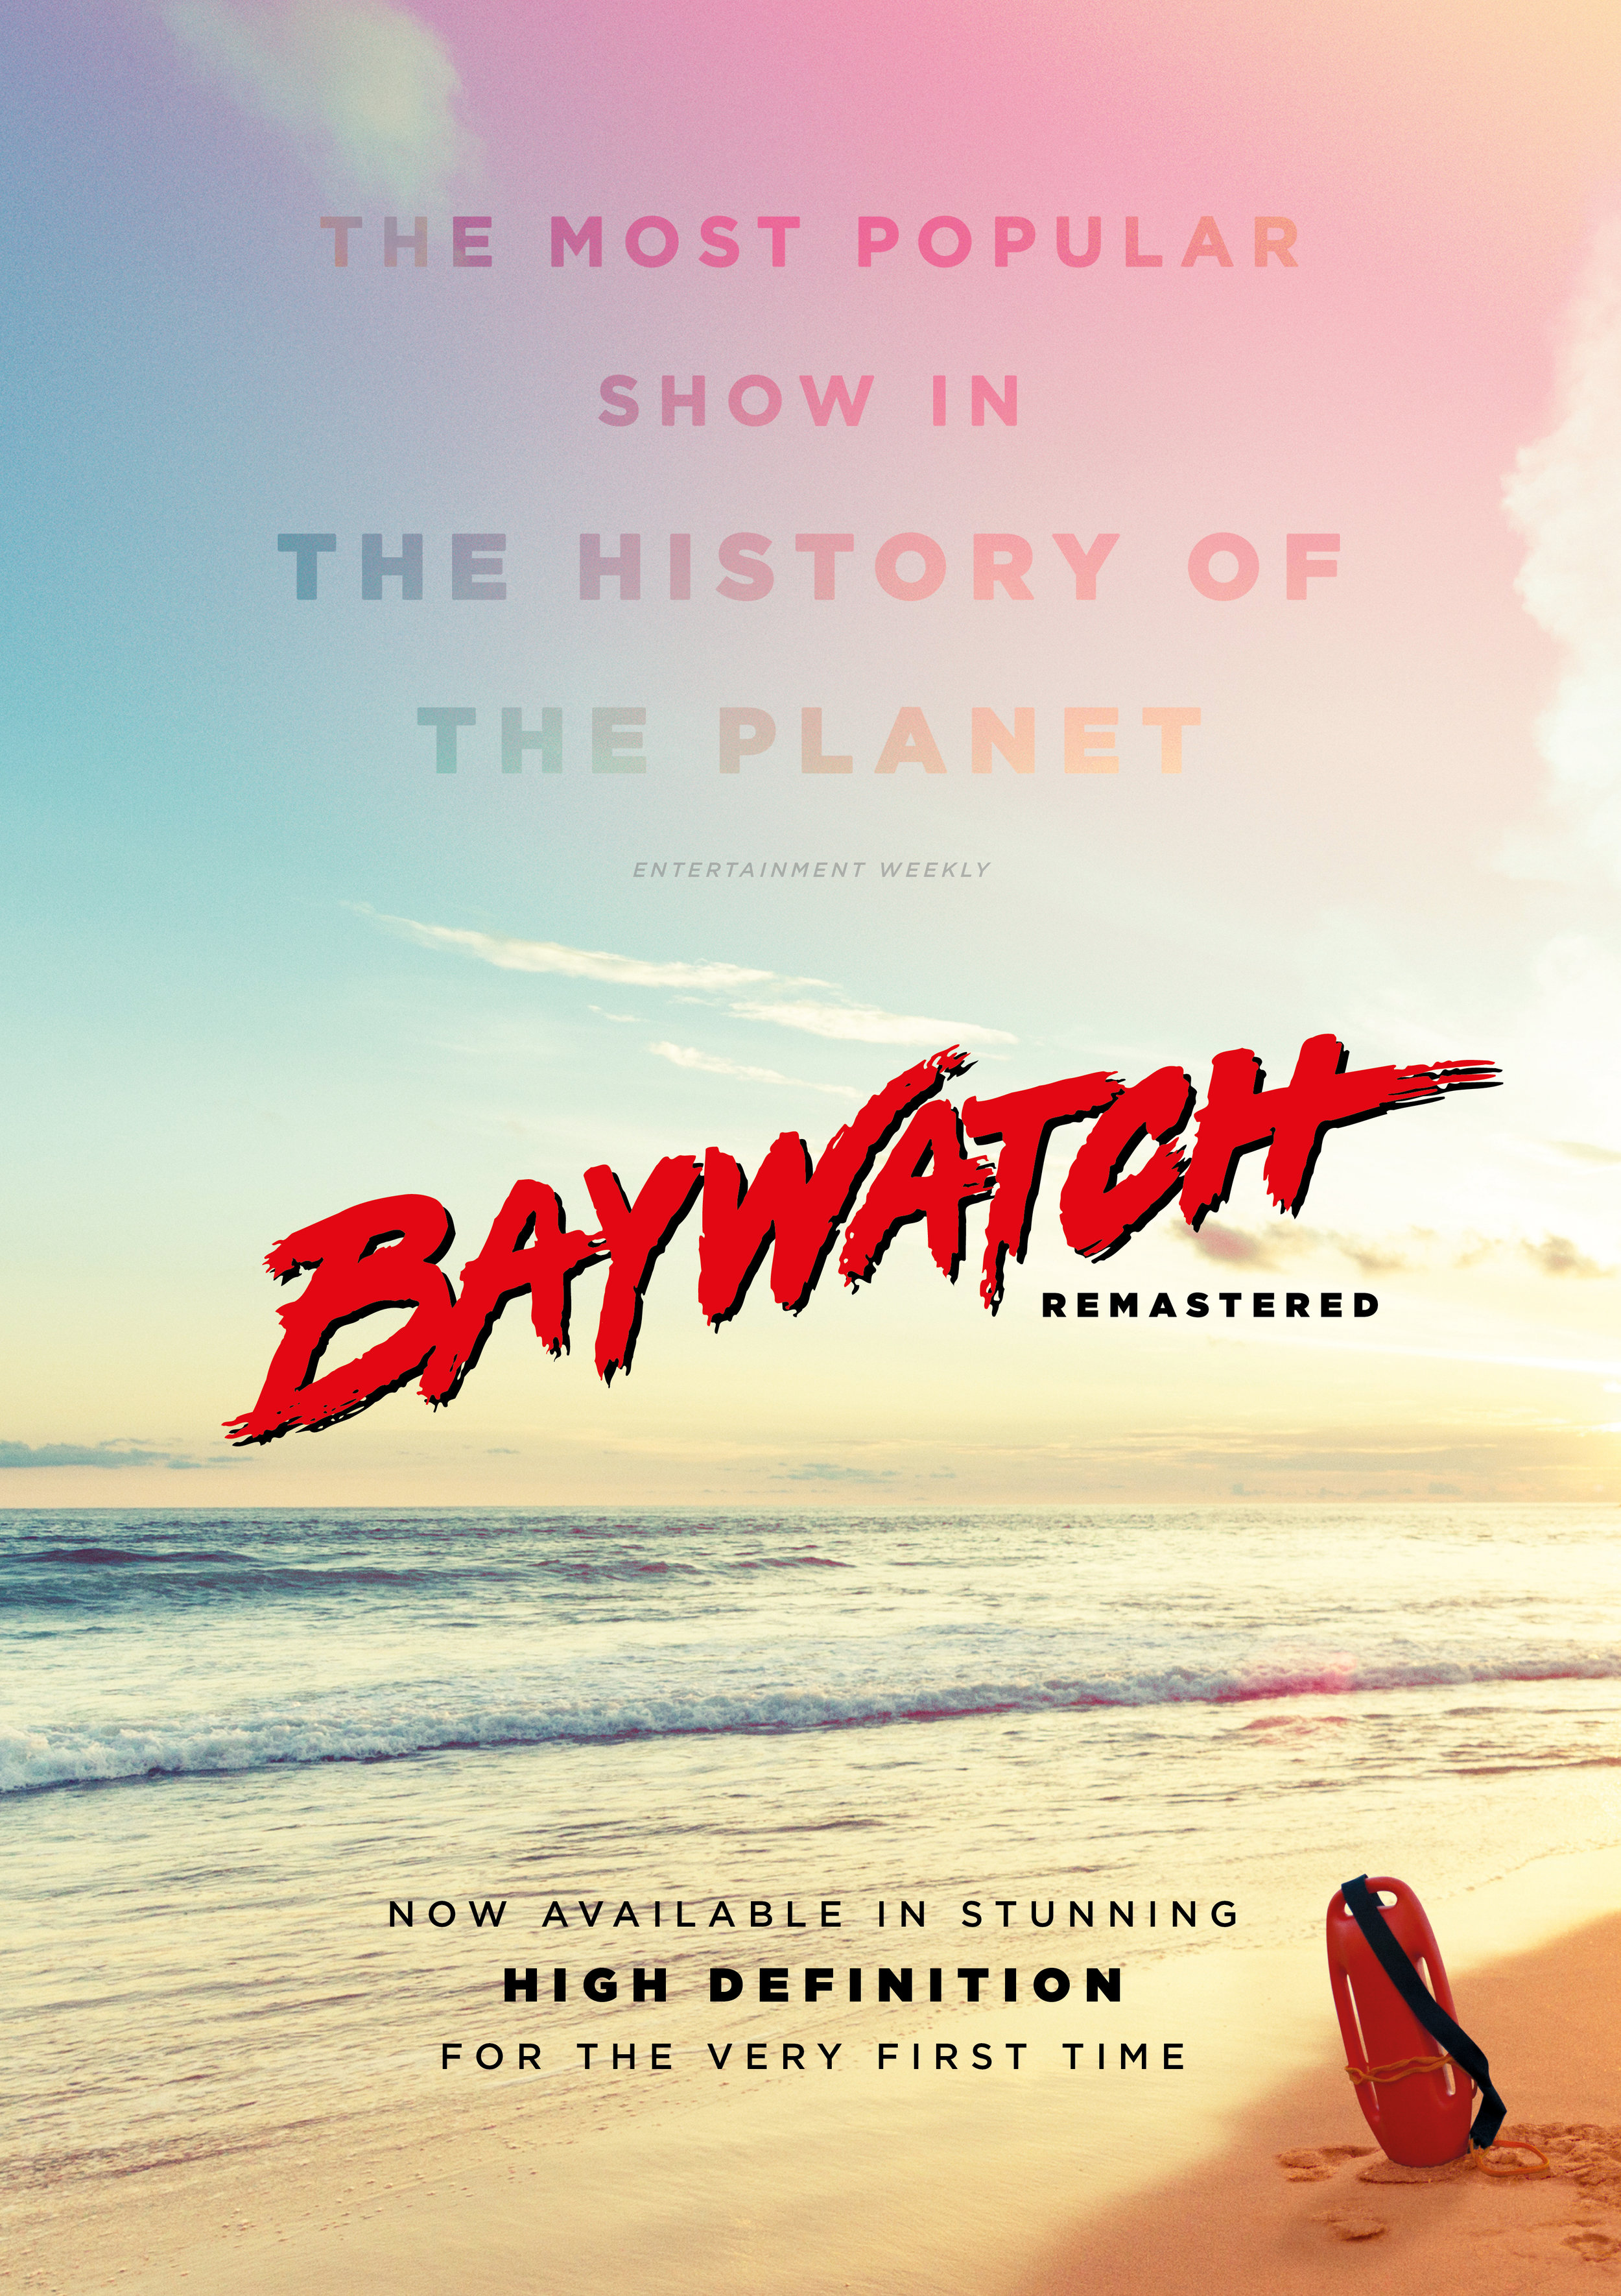 LCD_FREMANTLE_BAYWATCH_A1_POSTER_AW.jpg